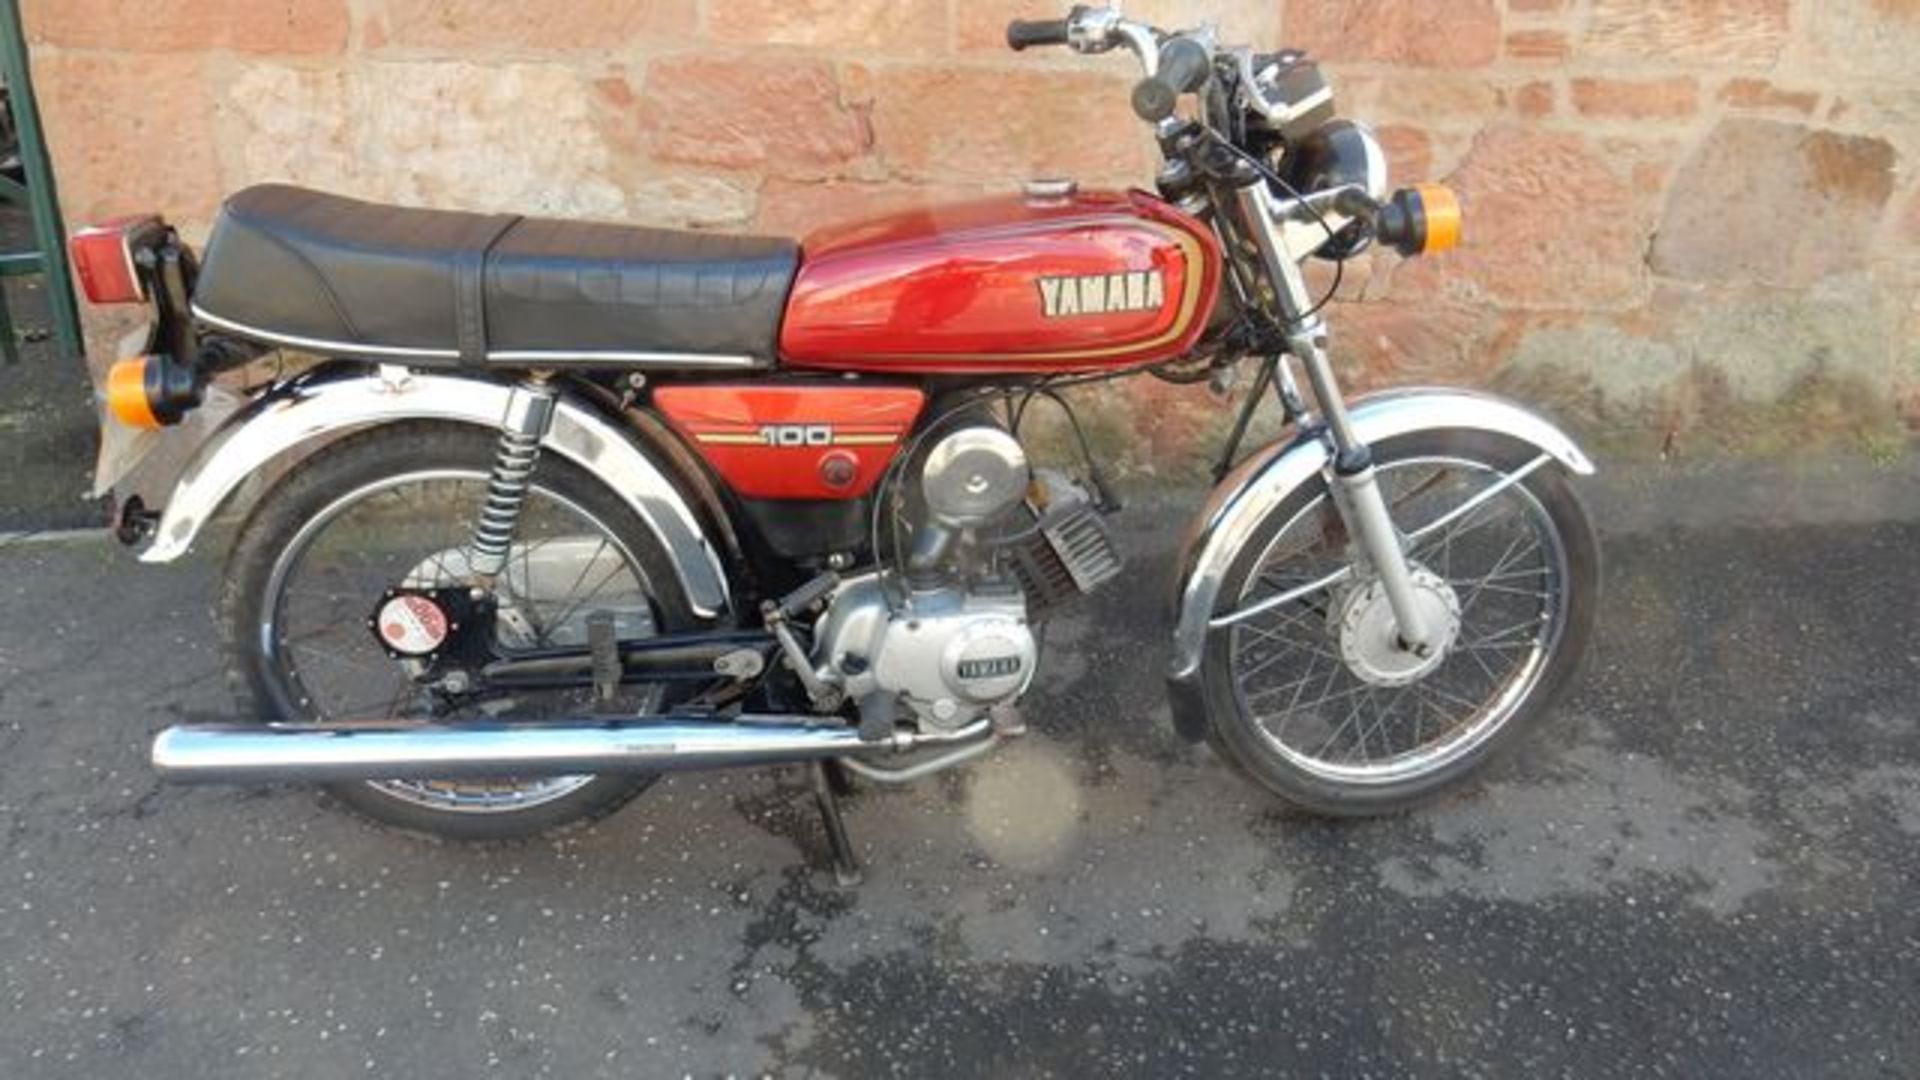 YAMAHA, YB100 - 97cc, Frame number 2U0327714 - "The big Fizzie" this example still bears the